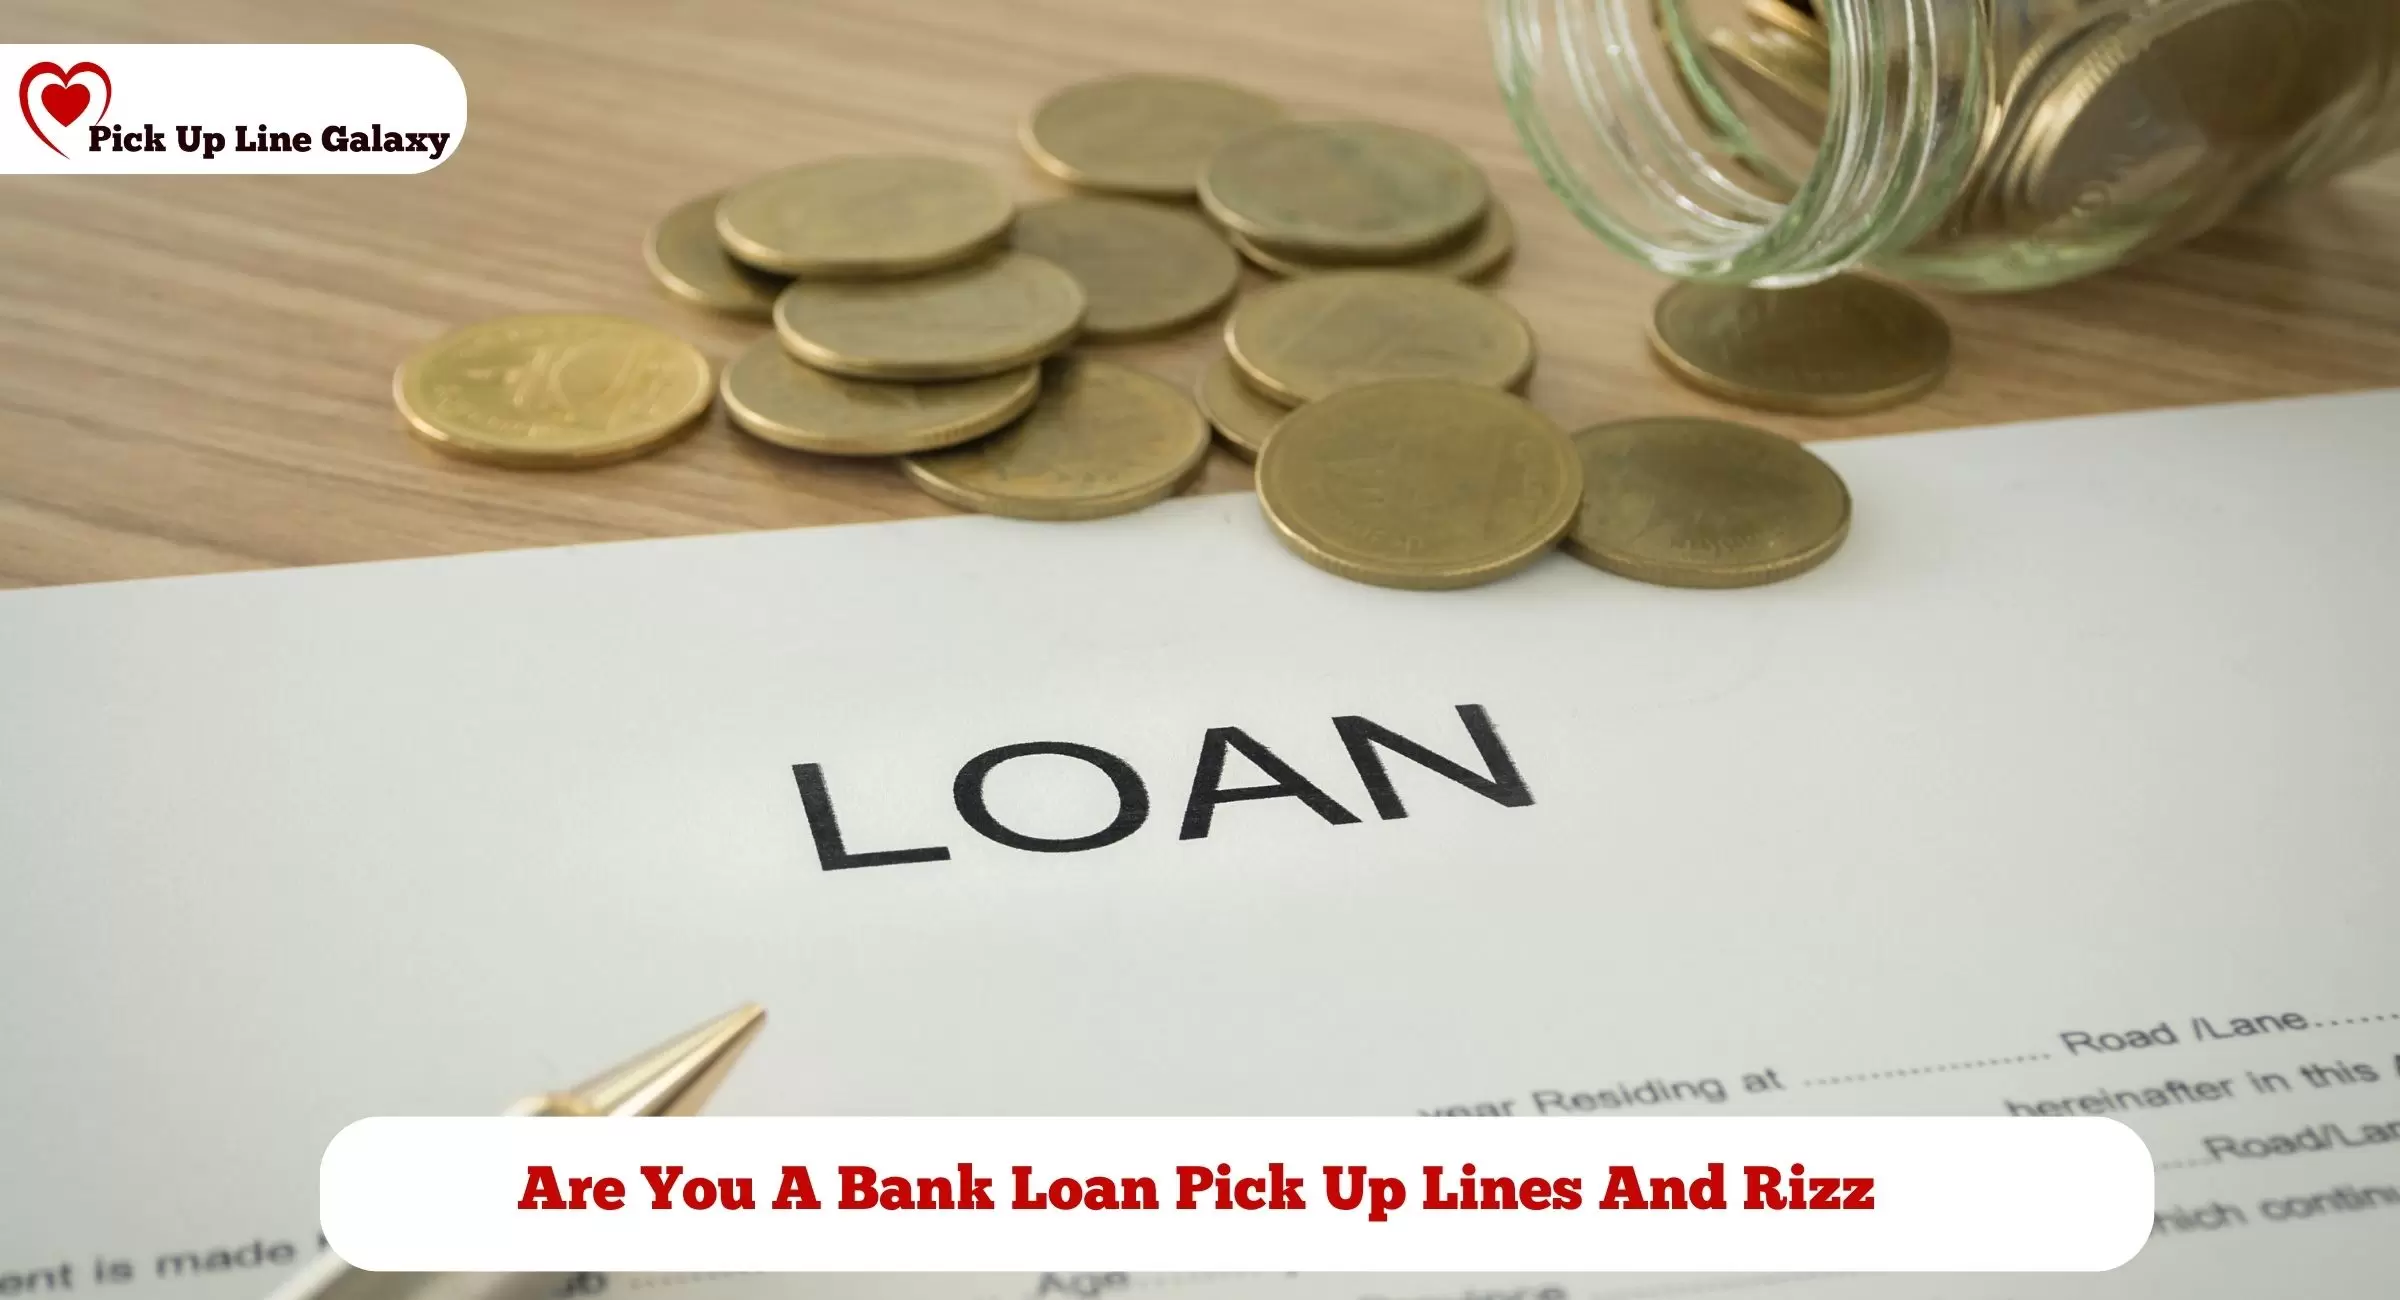 Are You A Bank Loan Pick Up Lines And Rizz